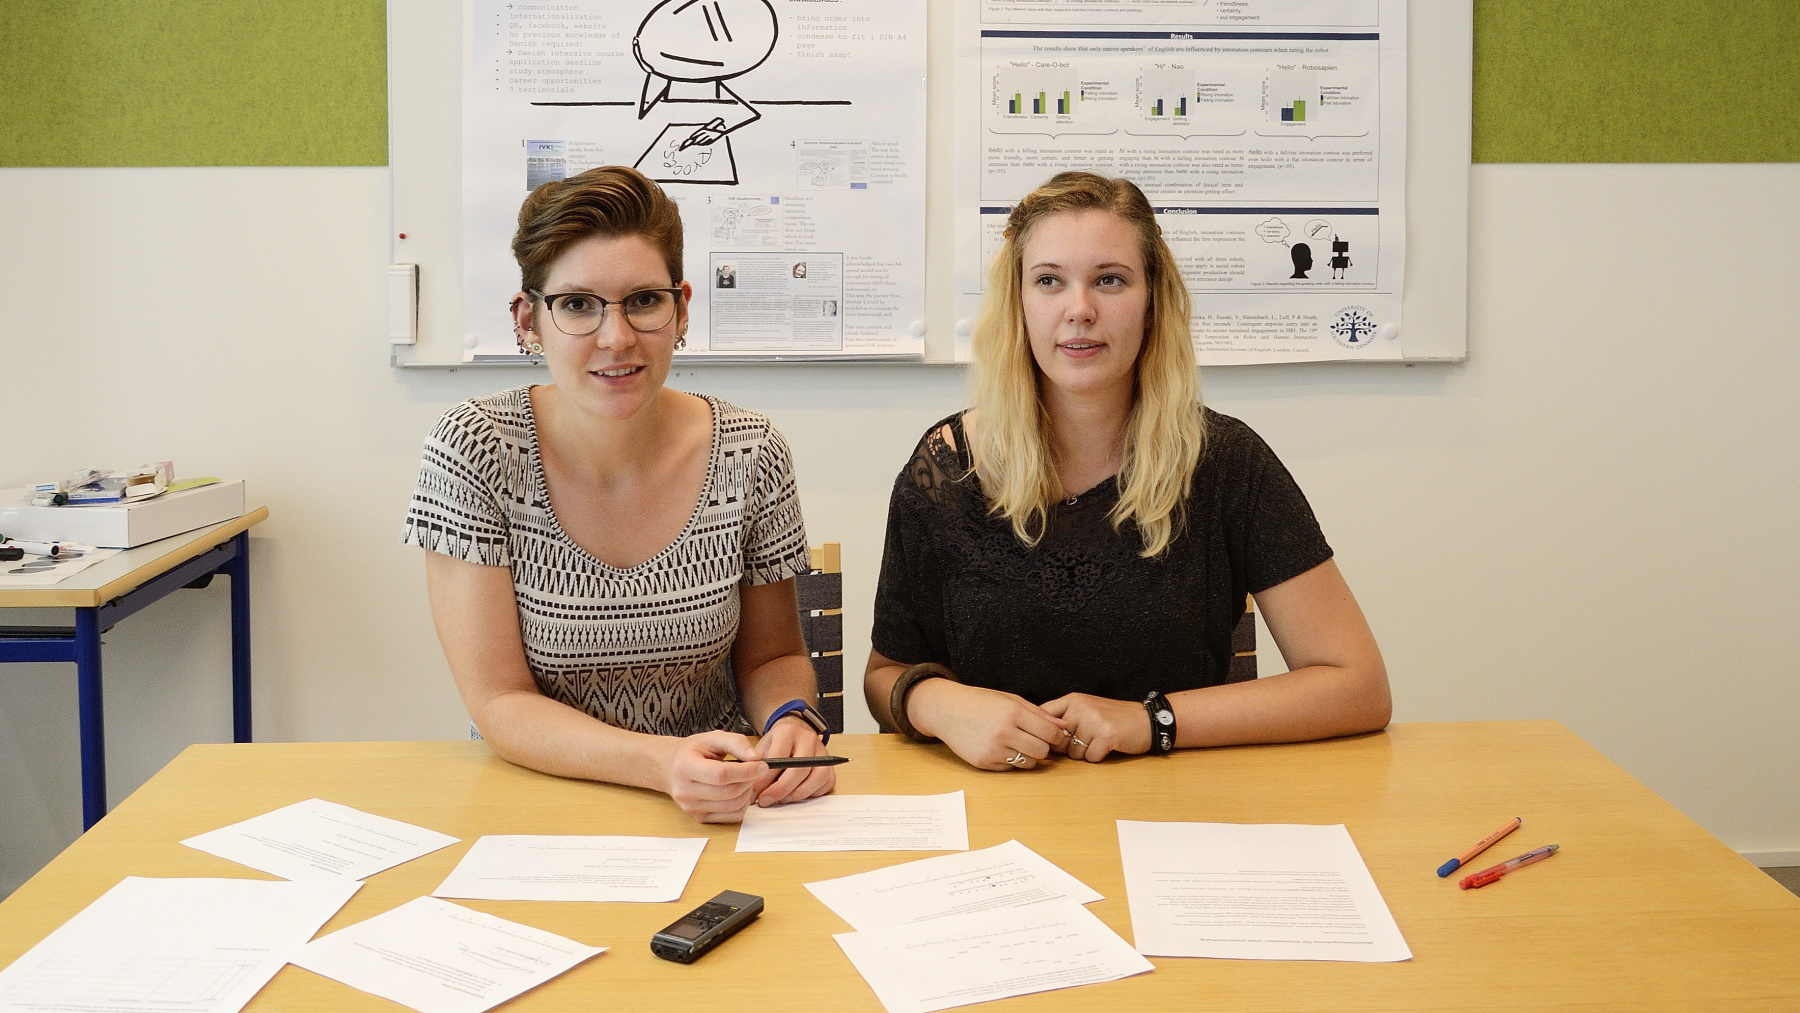 Nathalie Schümchen and Rosalyn Melissa Langedijk developing a concept for an experiment in the HRI-lab, Sønderborg. 